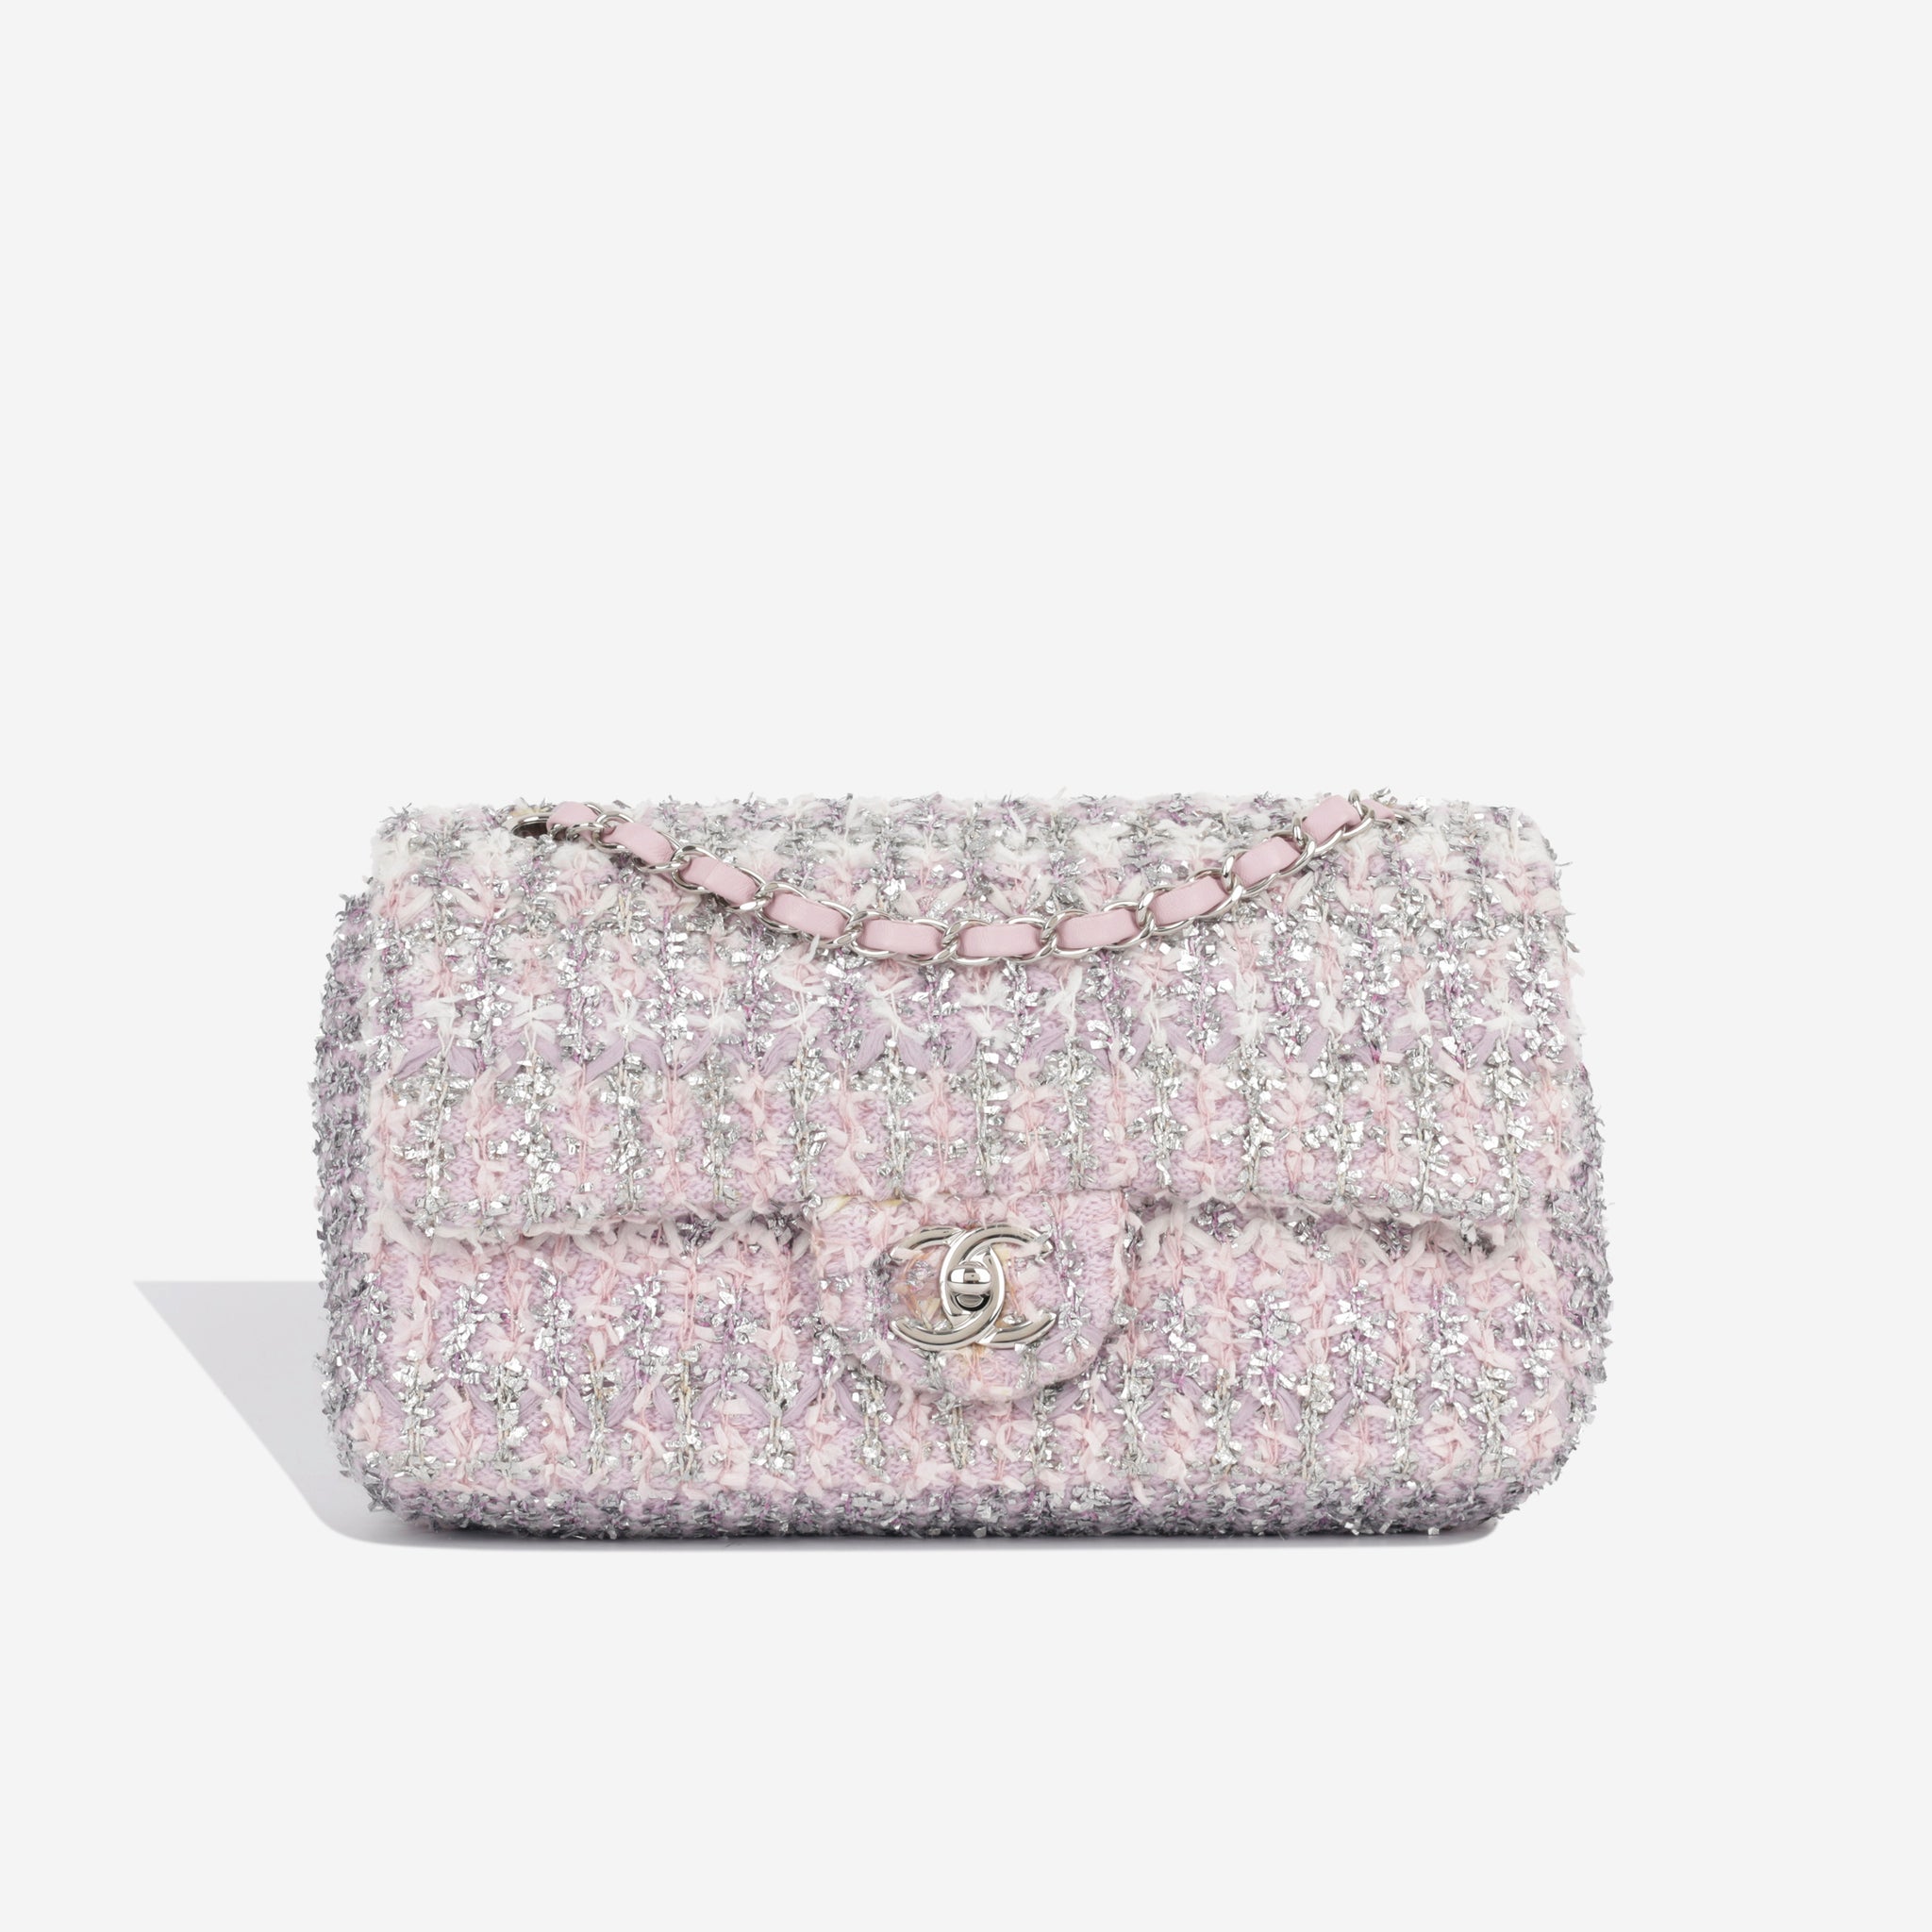 Chanel - Classic Flap Bag - Summer 2018 - Lilac Tweed / Silver - Limited  Edition | Bagista